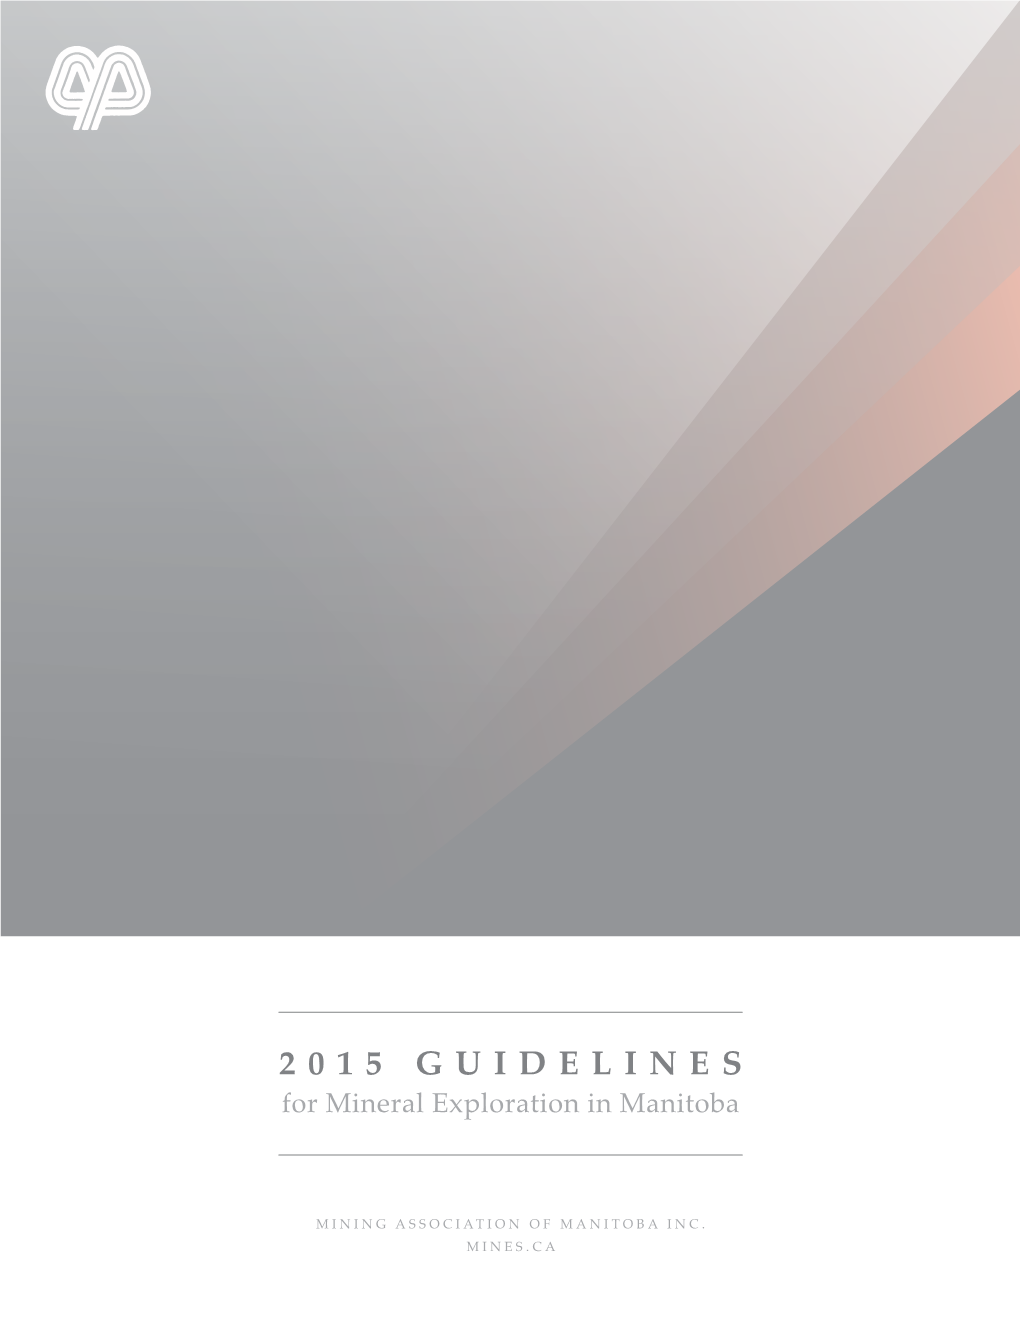 2015 Guidelines for Mineral Exploration in Manitoba